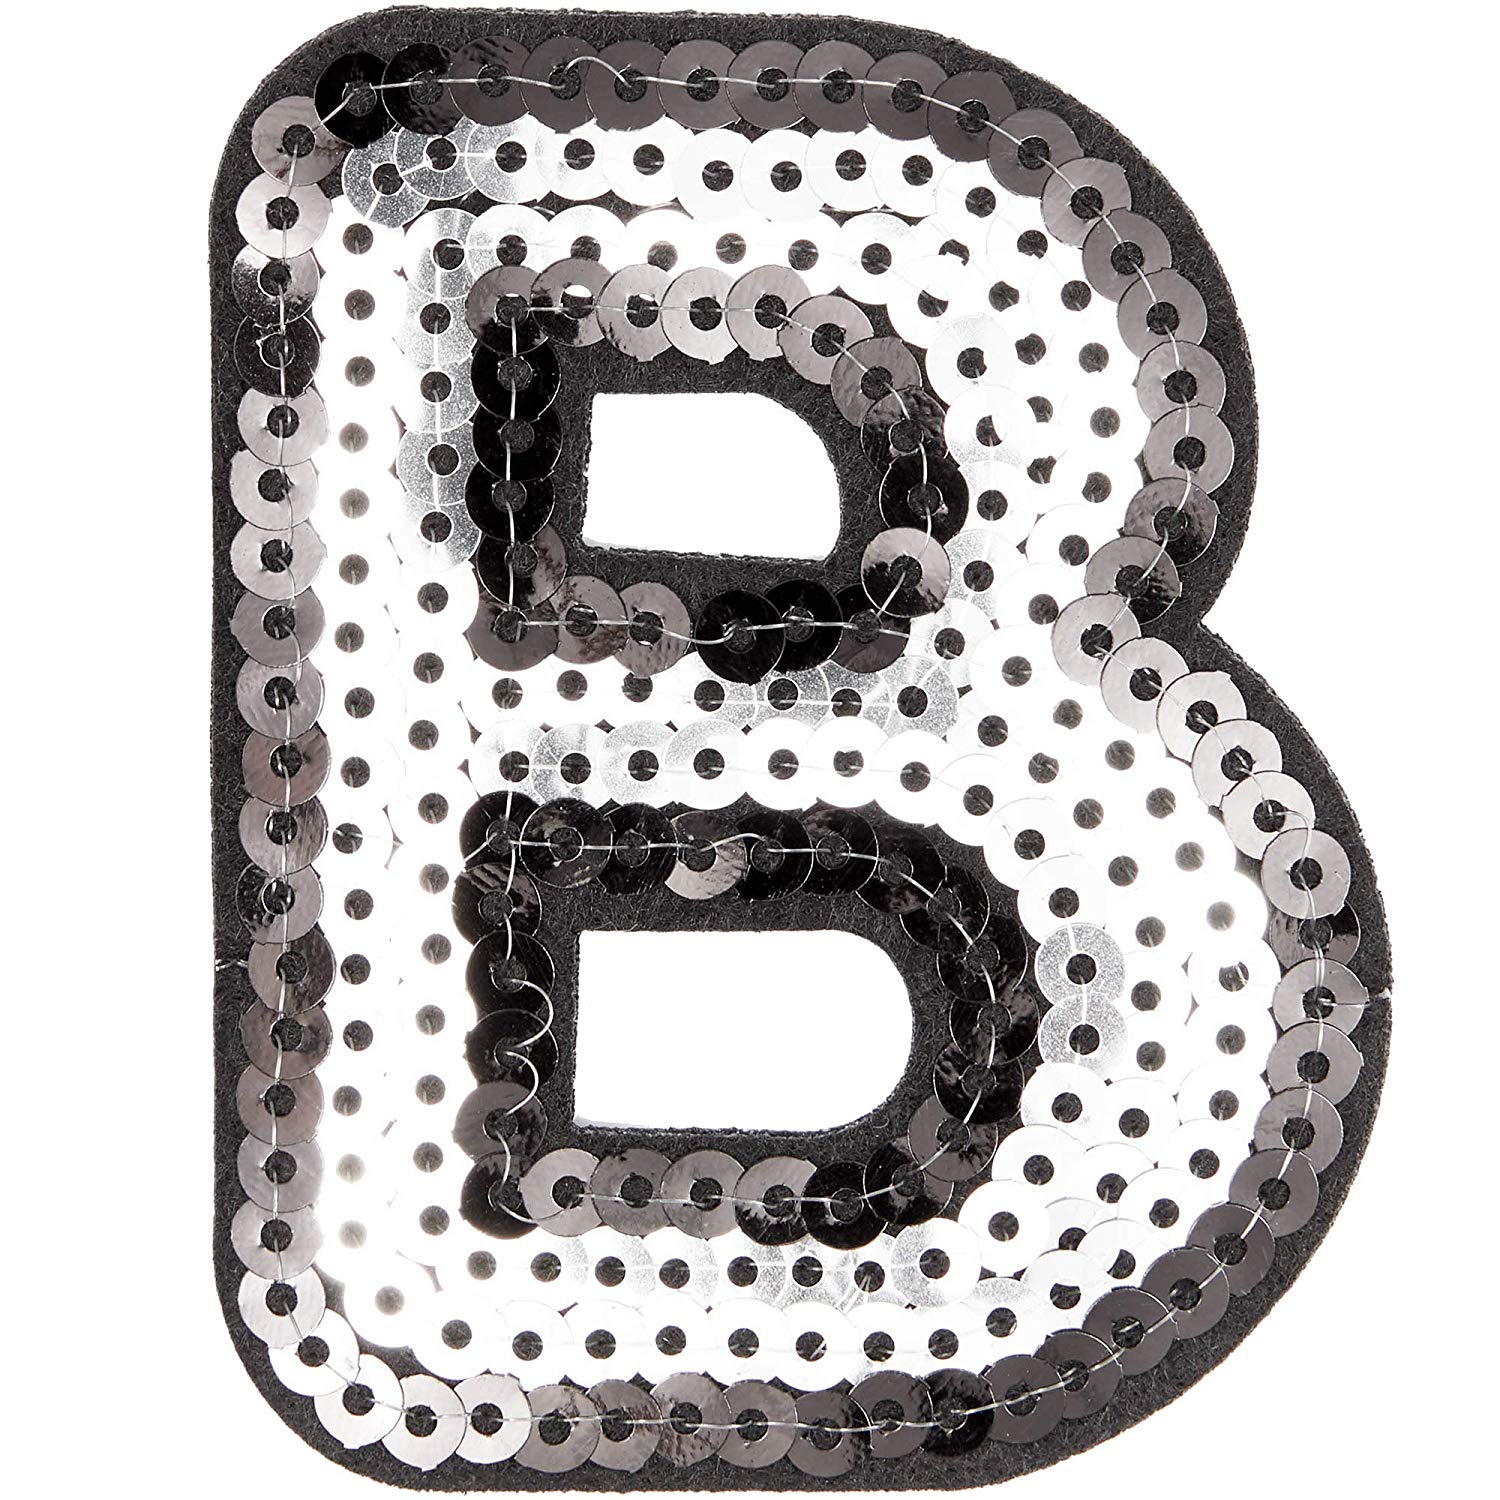 Bright Creations Iron On Letters for clothing, 2 Sets A-Z Embroidery  Patches for Jackets & Denim (52 Pieces, 14 x 13 in)